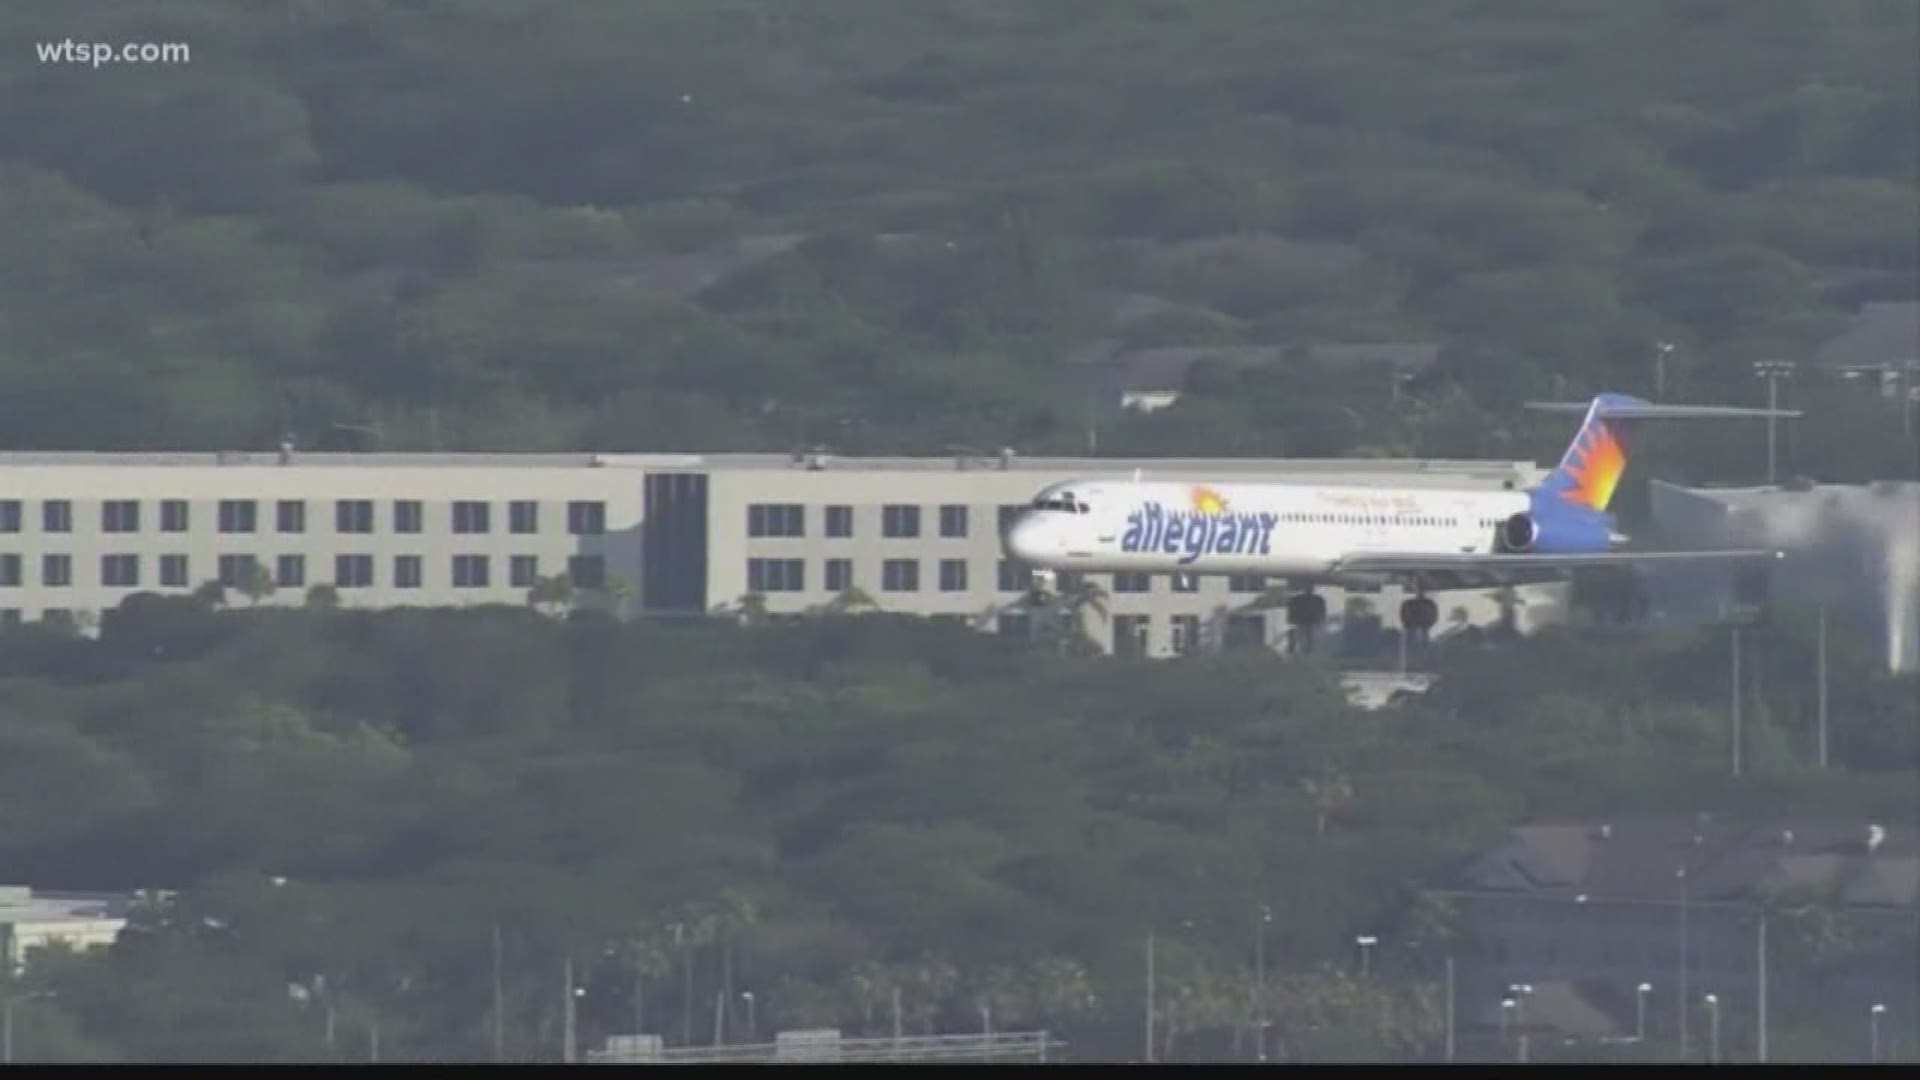 Allegiant Air Defends Safety Record After 60 Minutes Report